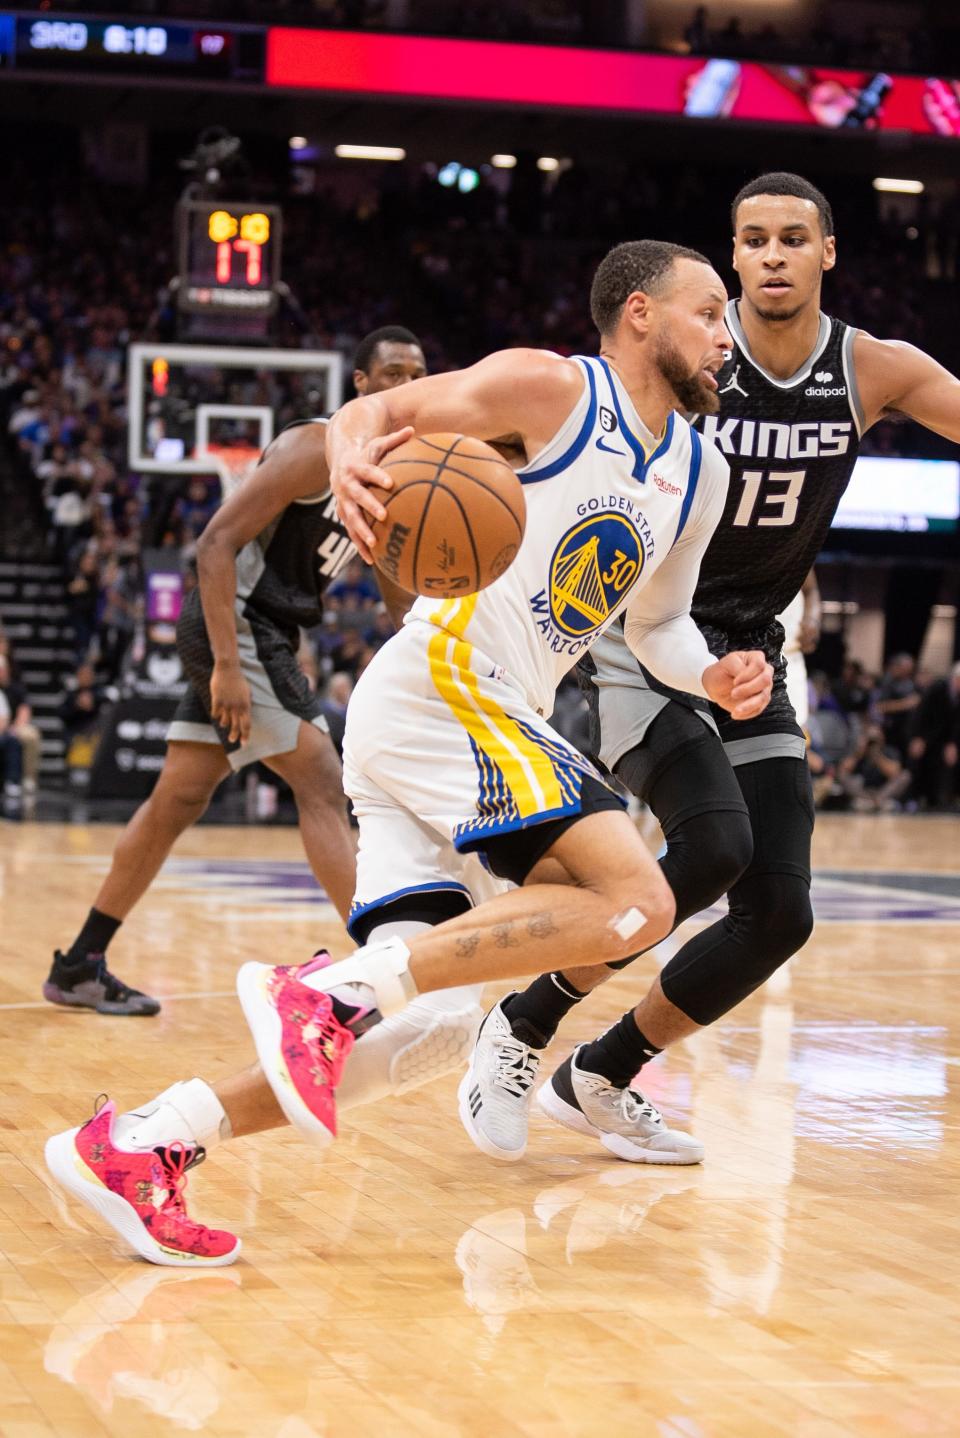 Steph Curry and the Warriors - who have won four NBA Finals since 2015 - face the Sacramento Kings - who are making their first playoff appearance since 2006 - in the first round.